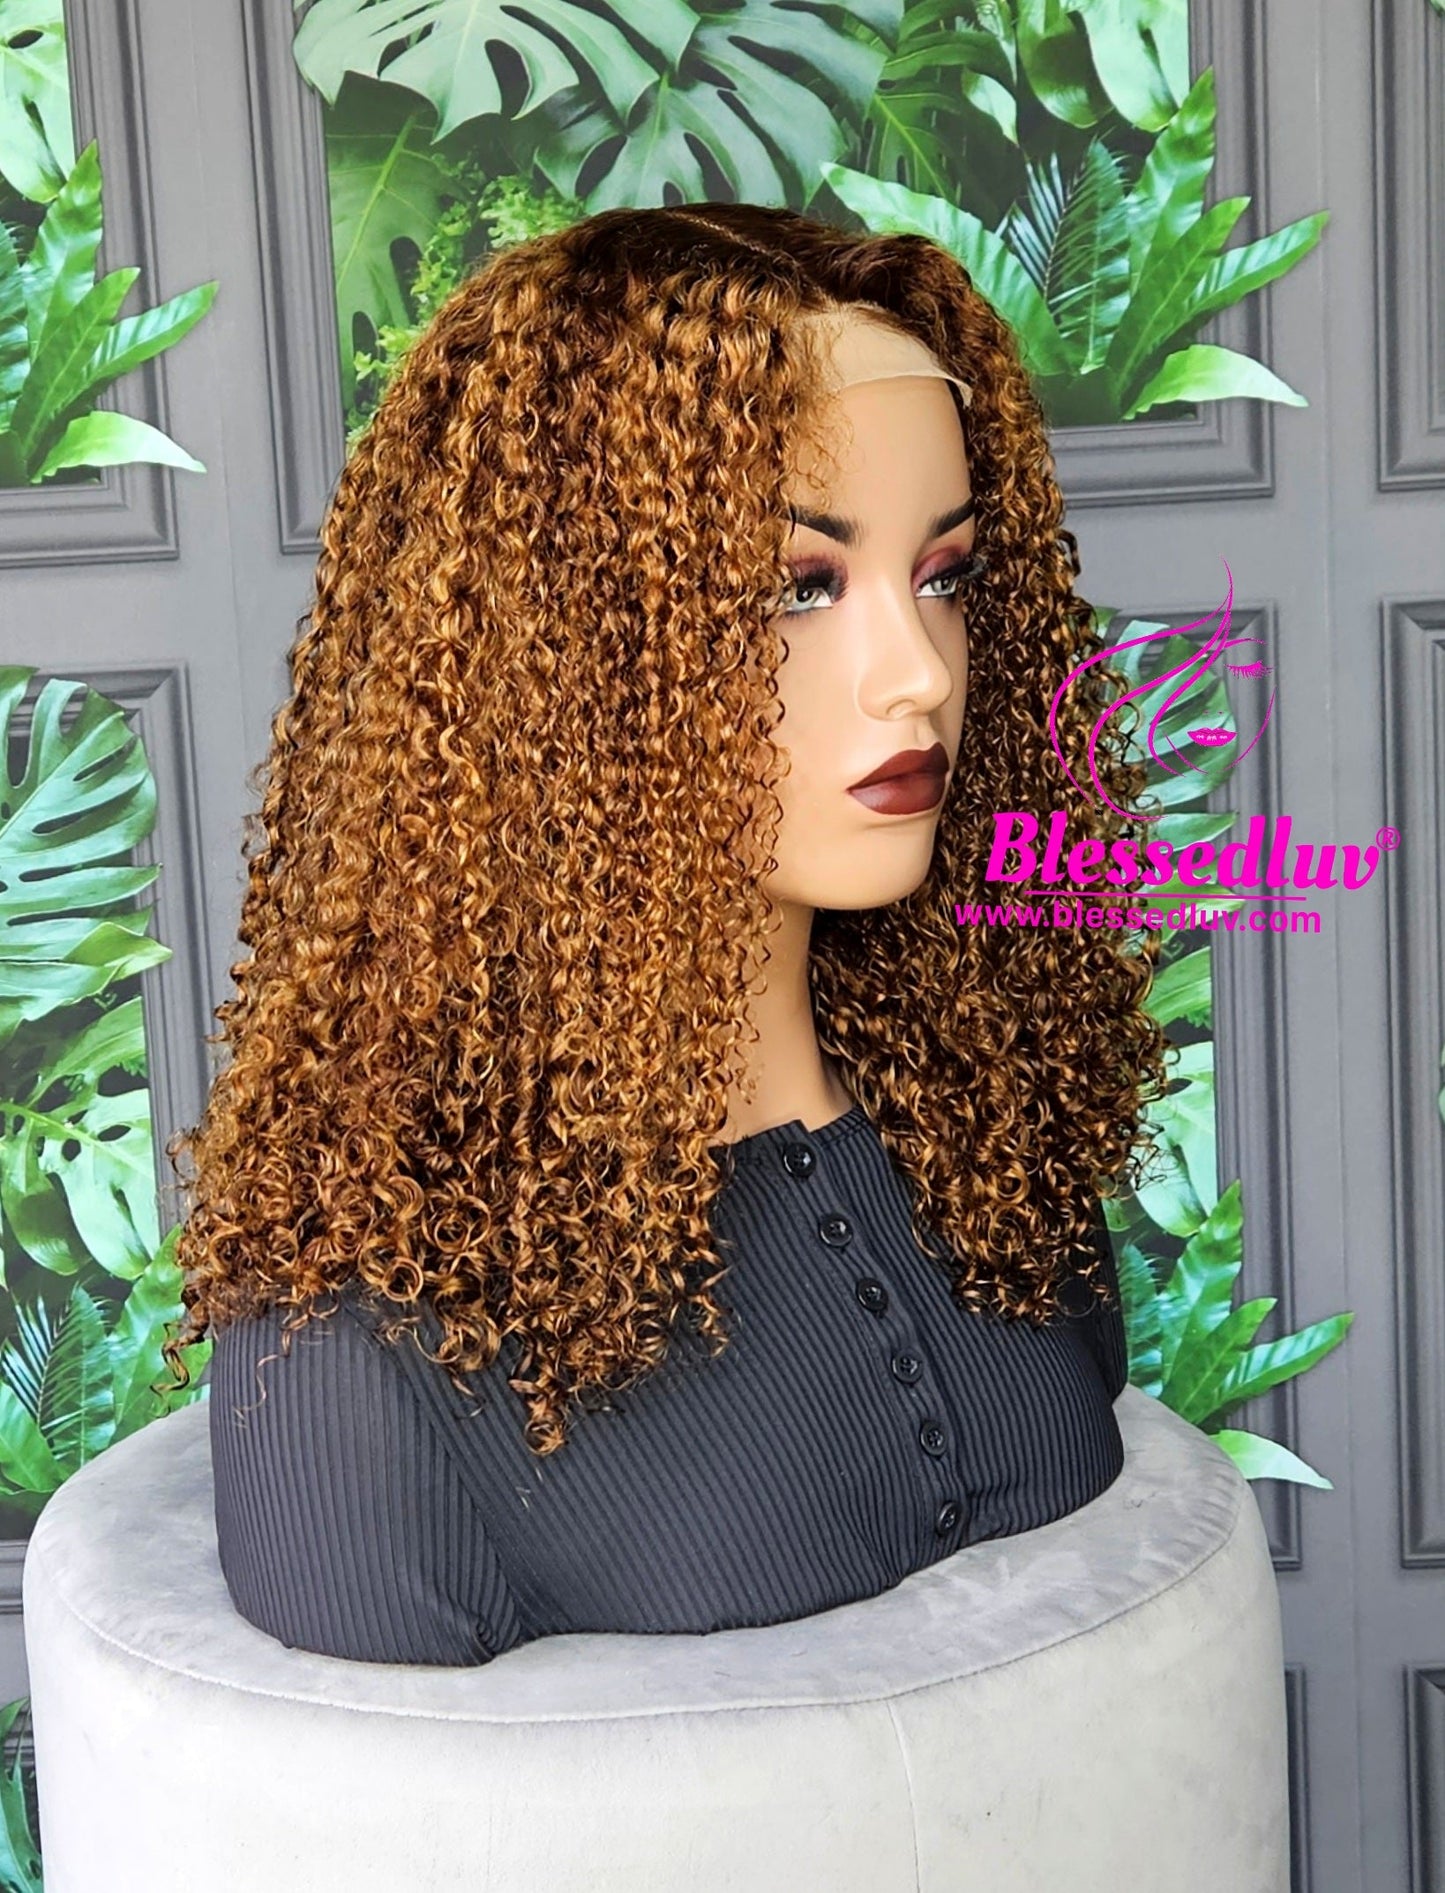 London - Luxury Curly Balayage Lace Closure Wig - Center Parting-WIG-www.blessedluv.com-Brazilianweave.com